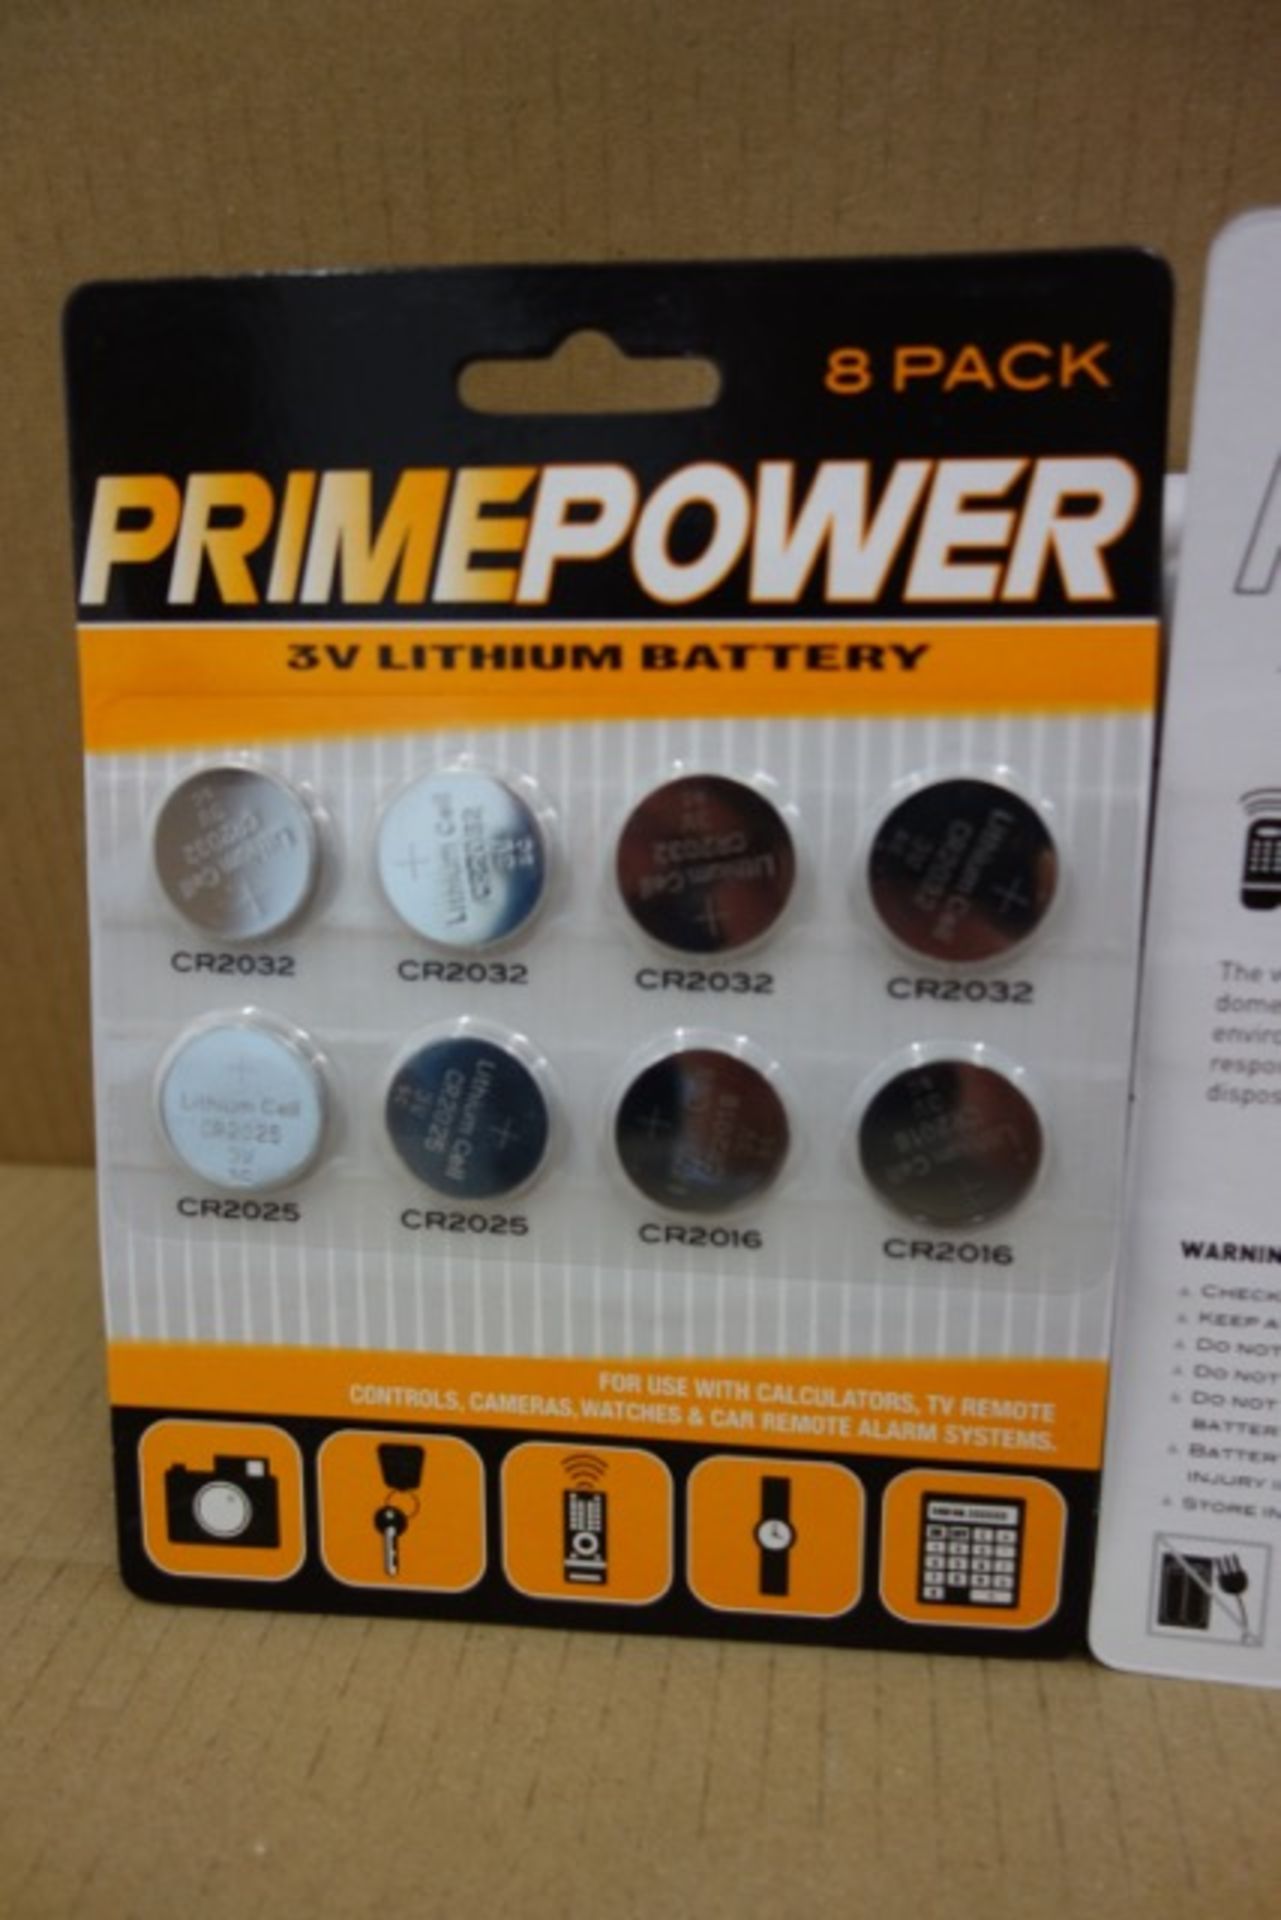 240 x Prime Power 8 Pack 3V Litium Battery Packs. Use to power: Watches, Calculators, TV Remotes, - Image 2 of 2